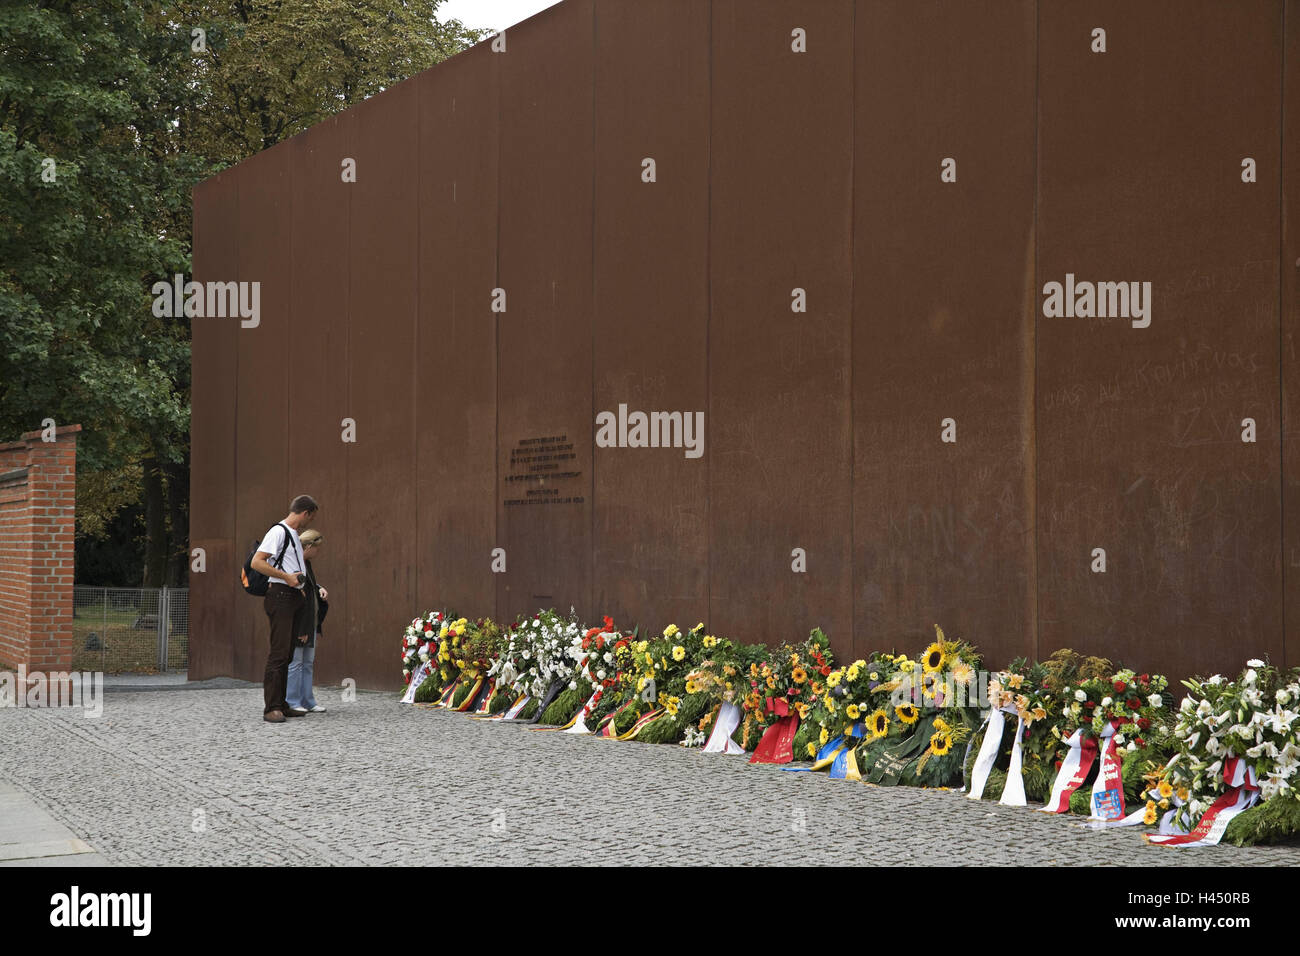 Germany, Berlin, defensive wall, memorial, floral wreaths, tourists, no model release, Europe, town, capital, monument, the GDR, metal wall, metal defensive wall, rusts, flowers, rims, memory, couple, tourist, sightseeing, outside, Stock Photo